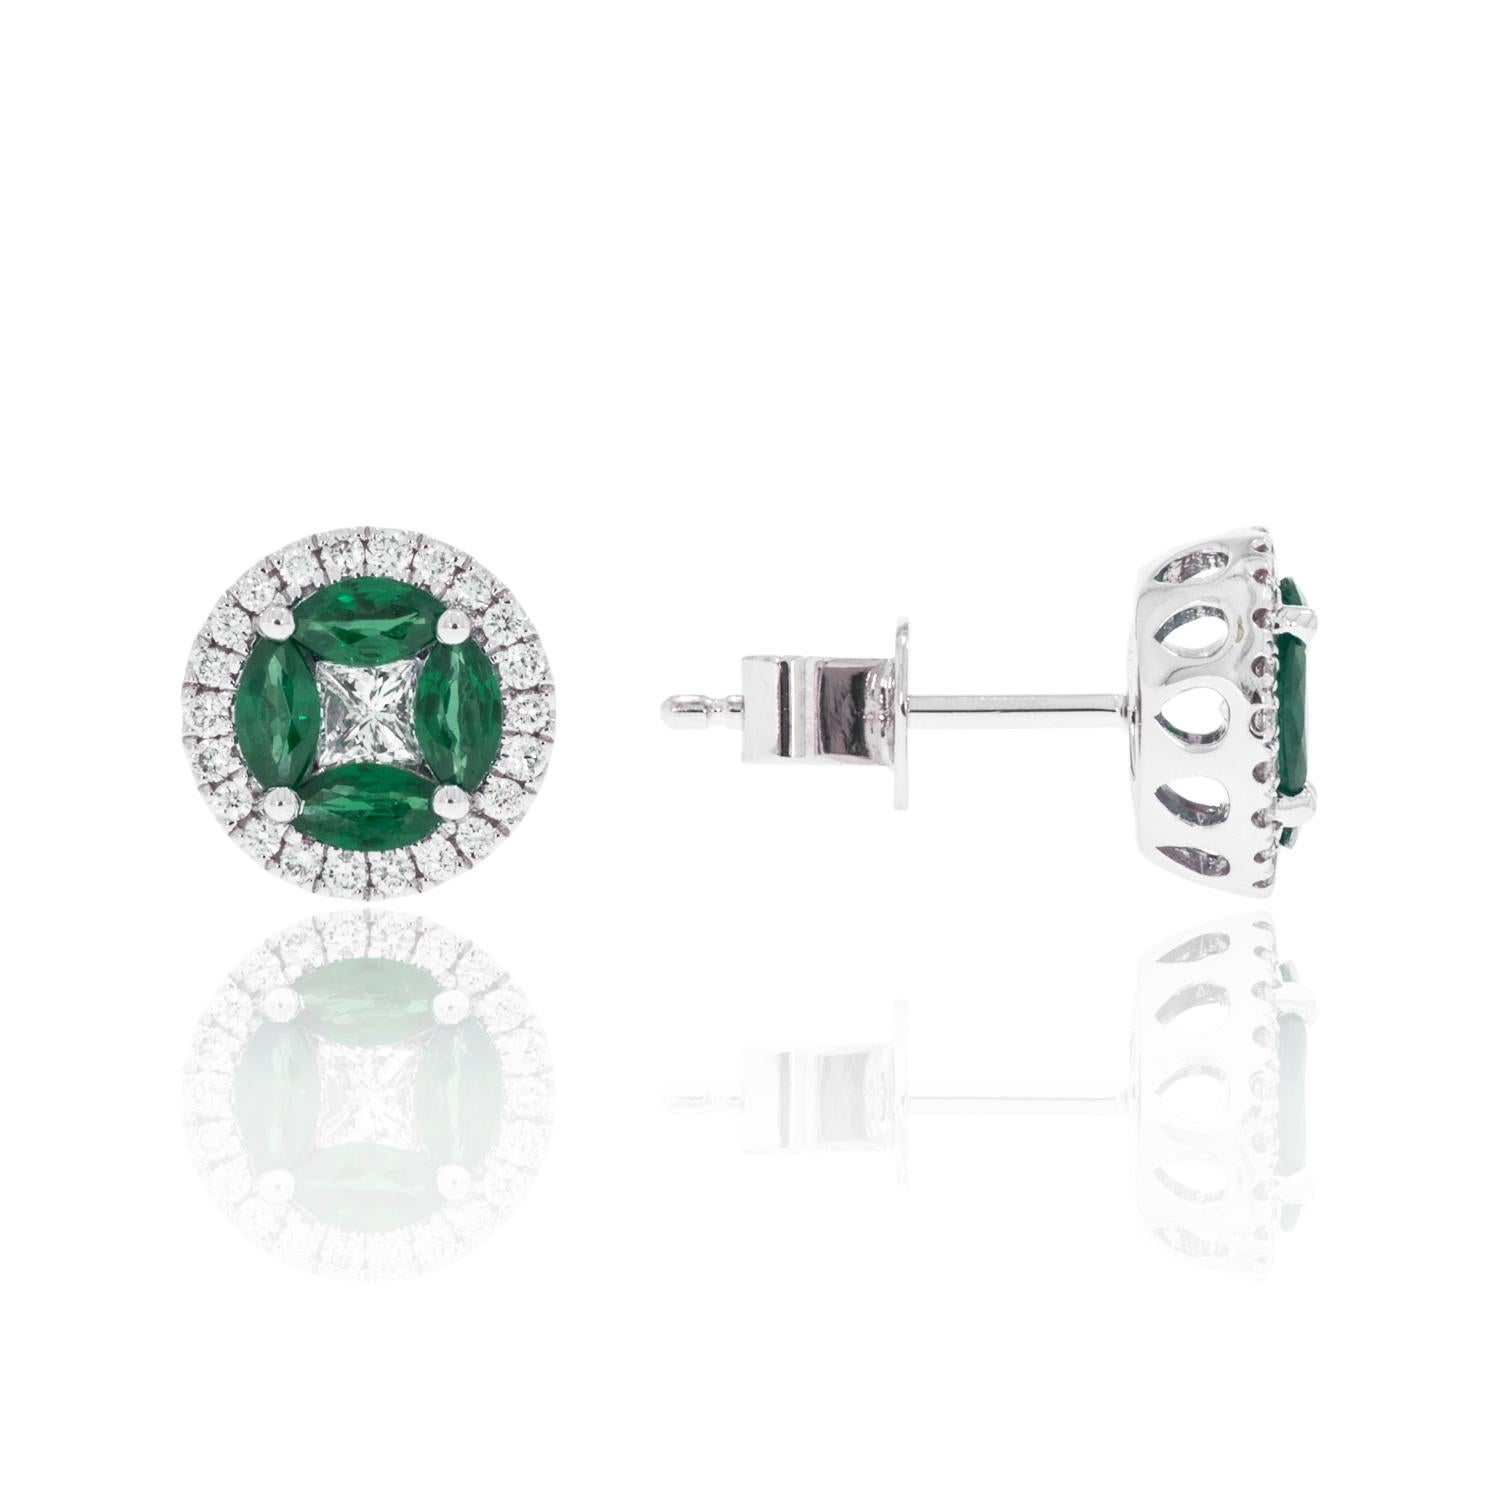 14K White Gold Emerald and Diamond Earrings featuring 0.70 Carat T.W. of Natural Green Emeralds and 0.44 Carats T.W. of Diamonds

Underline your look with this sharp 14K White Gold Diamond and Emerald Earrings. High quality Diamonds and emeralds.